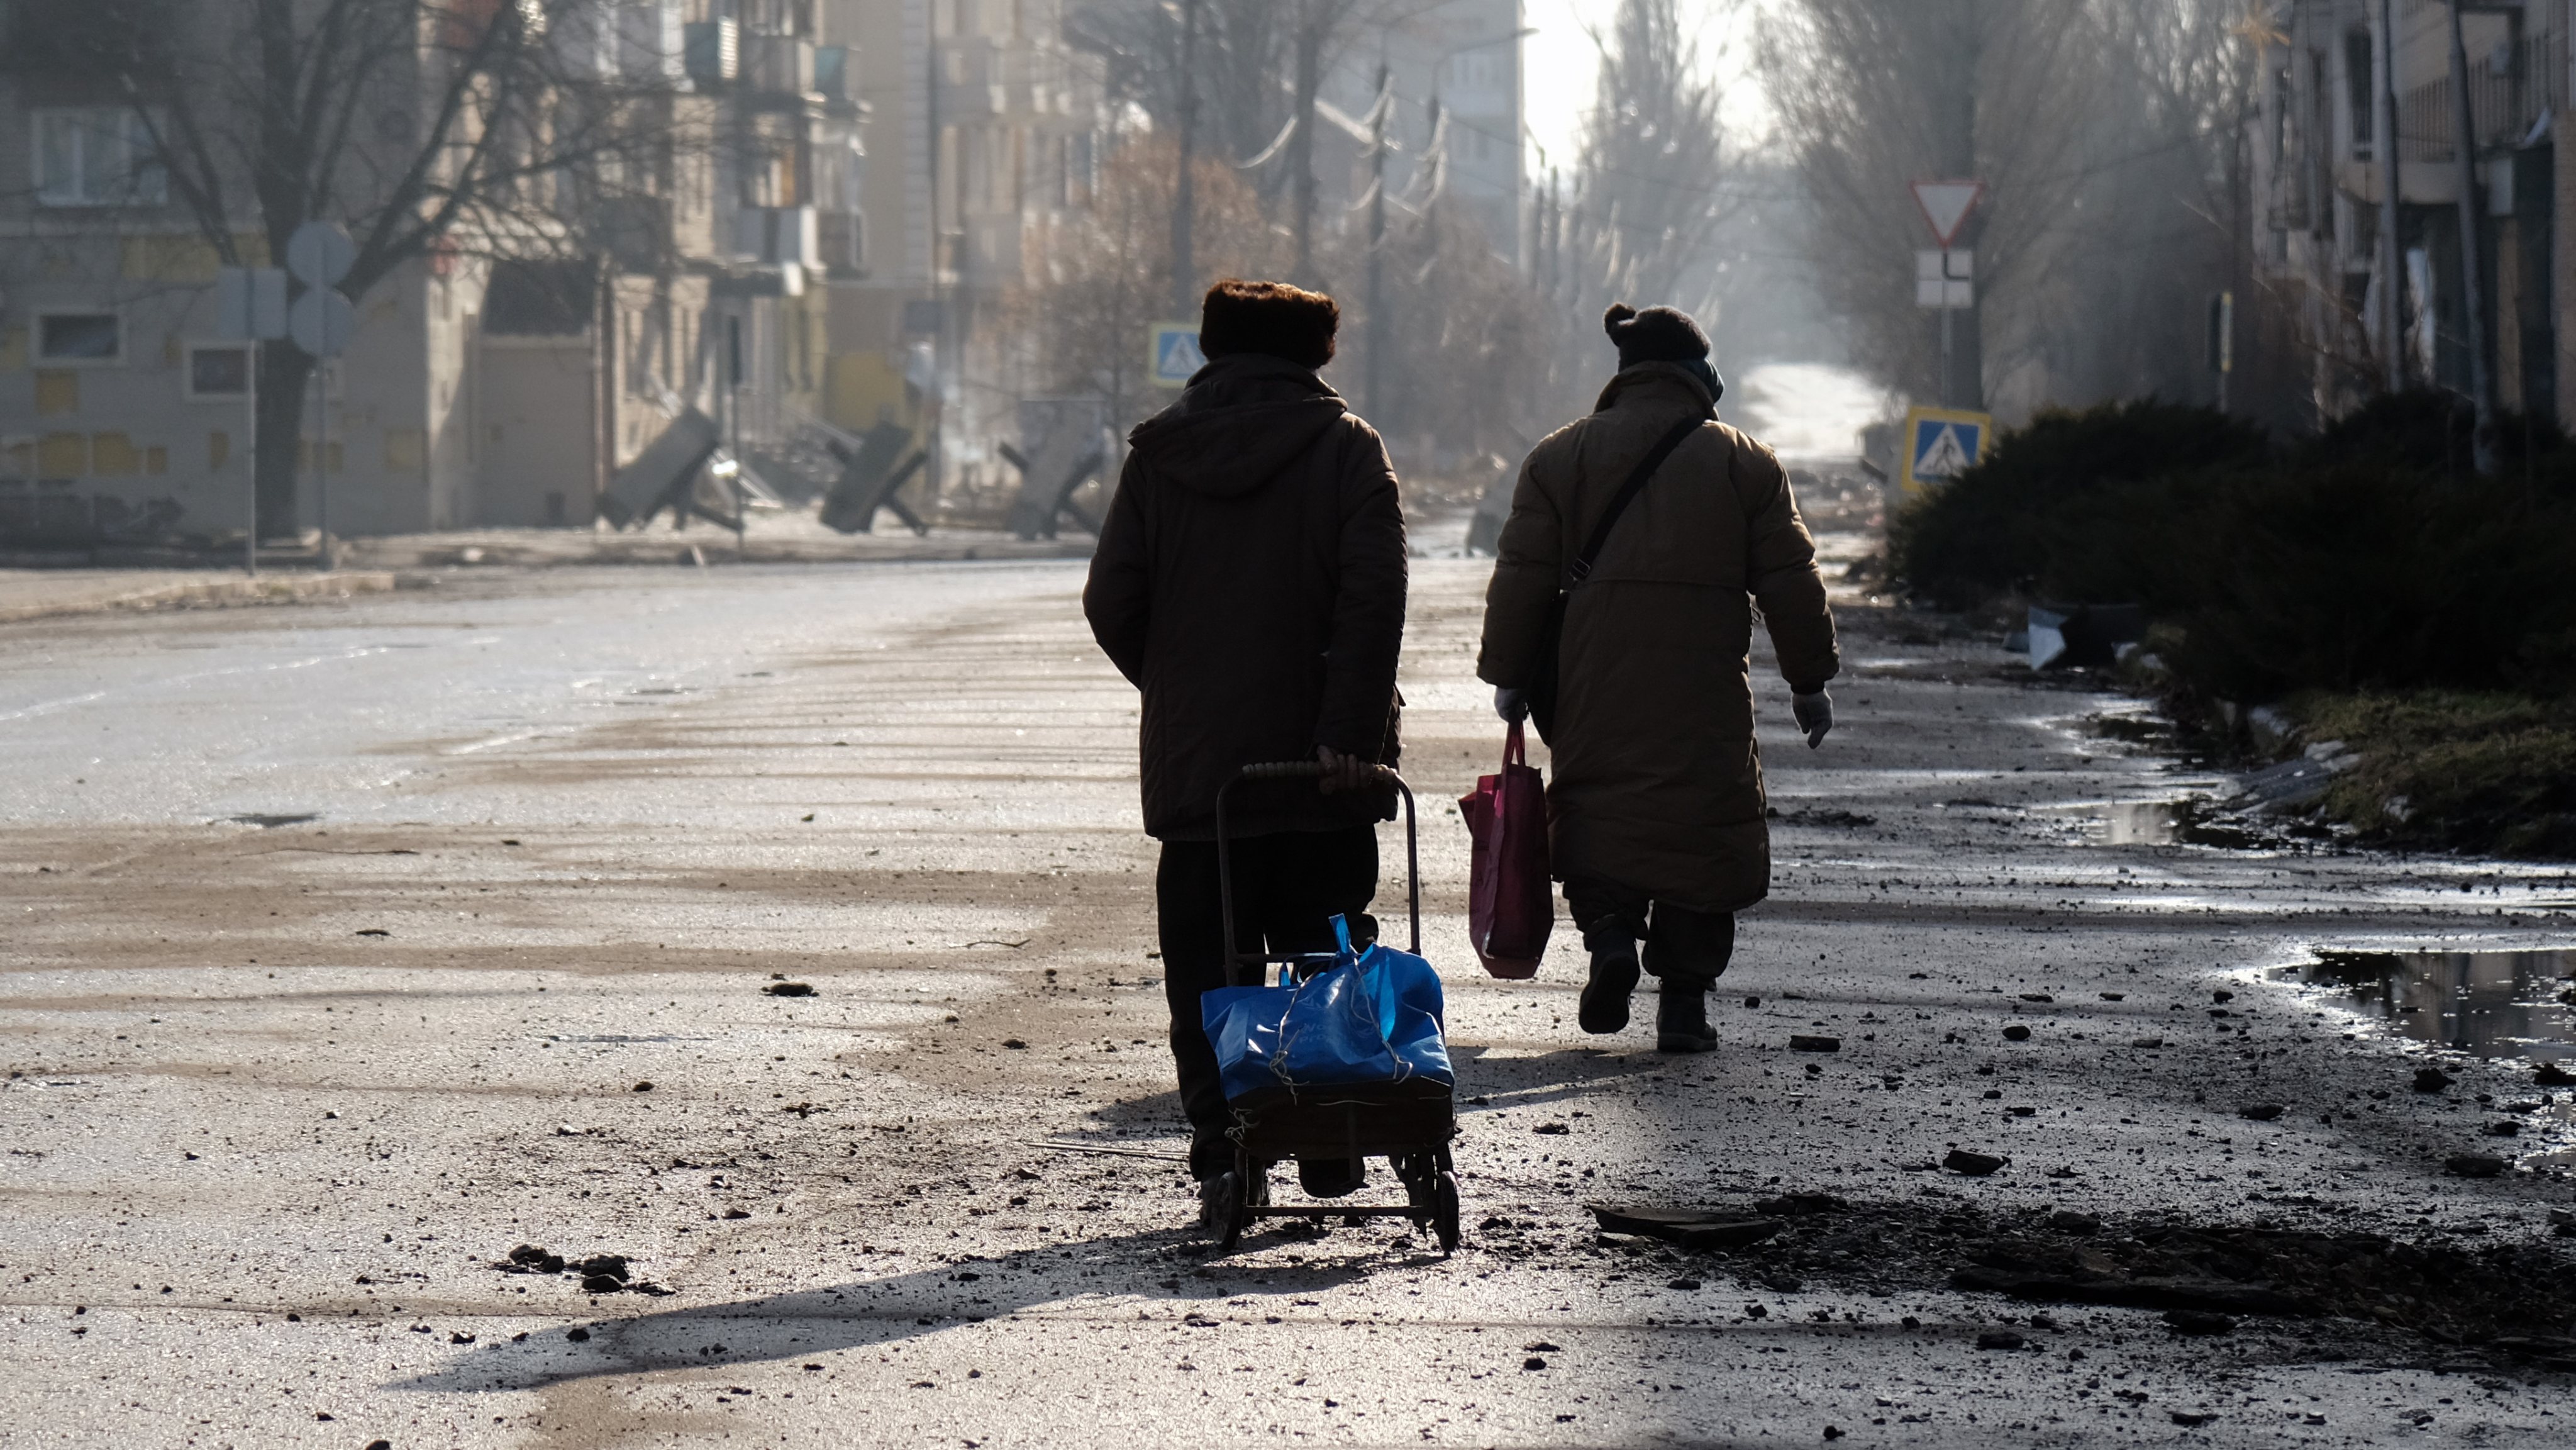 Daily Life In The Donetsk Region, More Than 10 Months After Russian Invasion